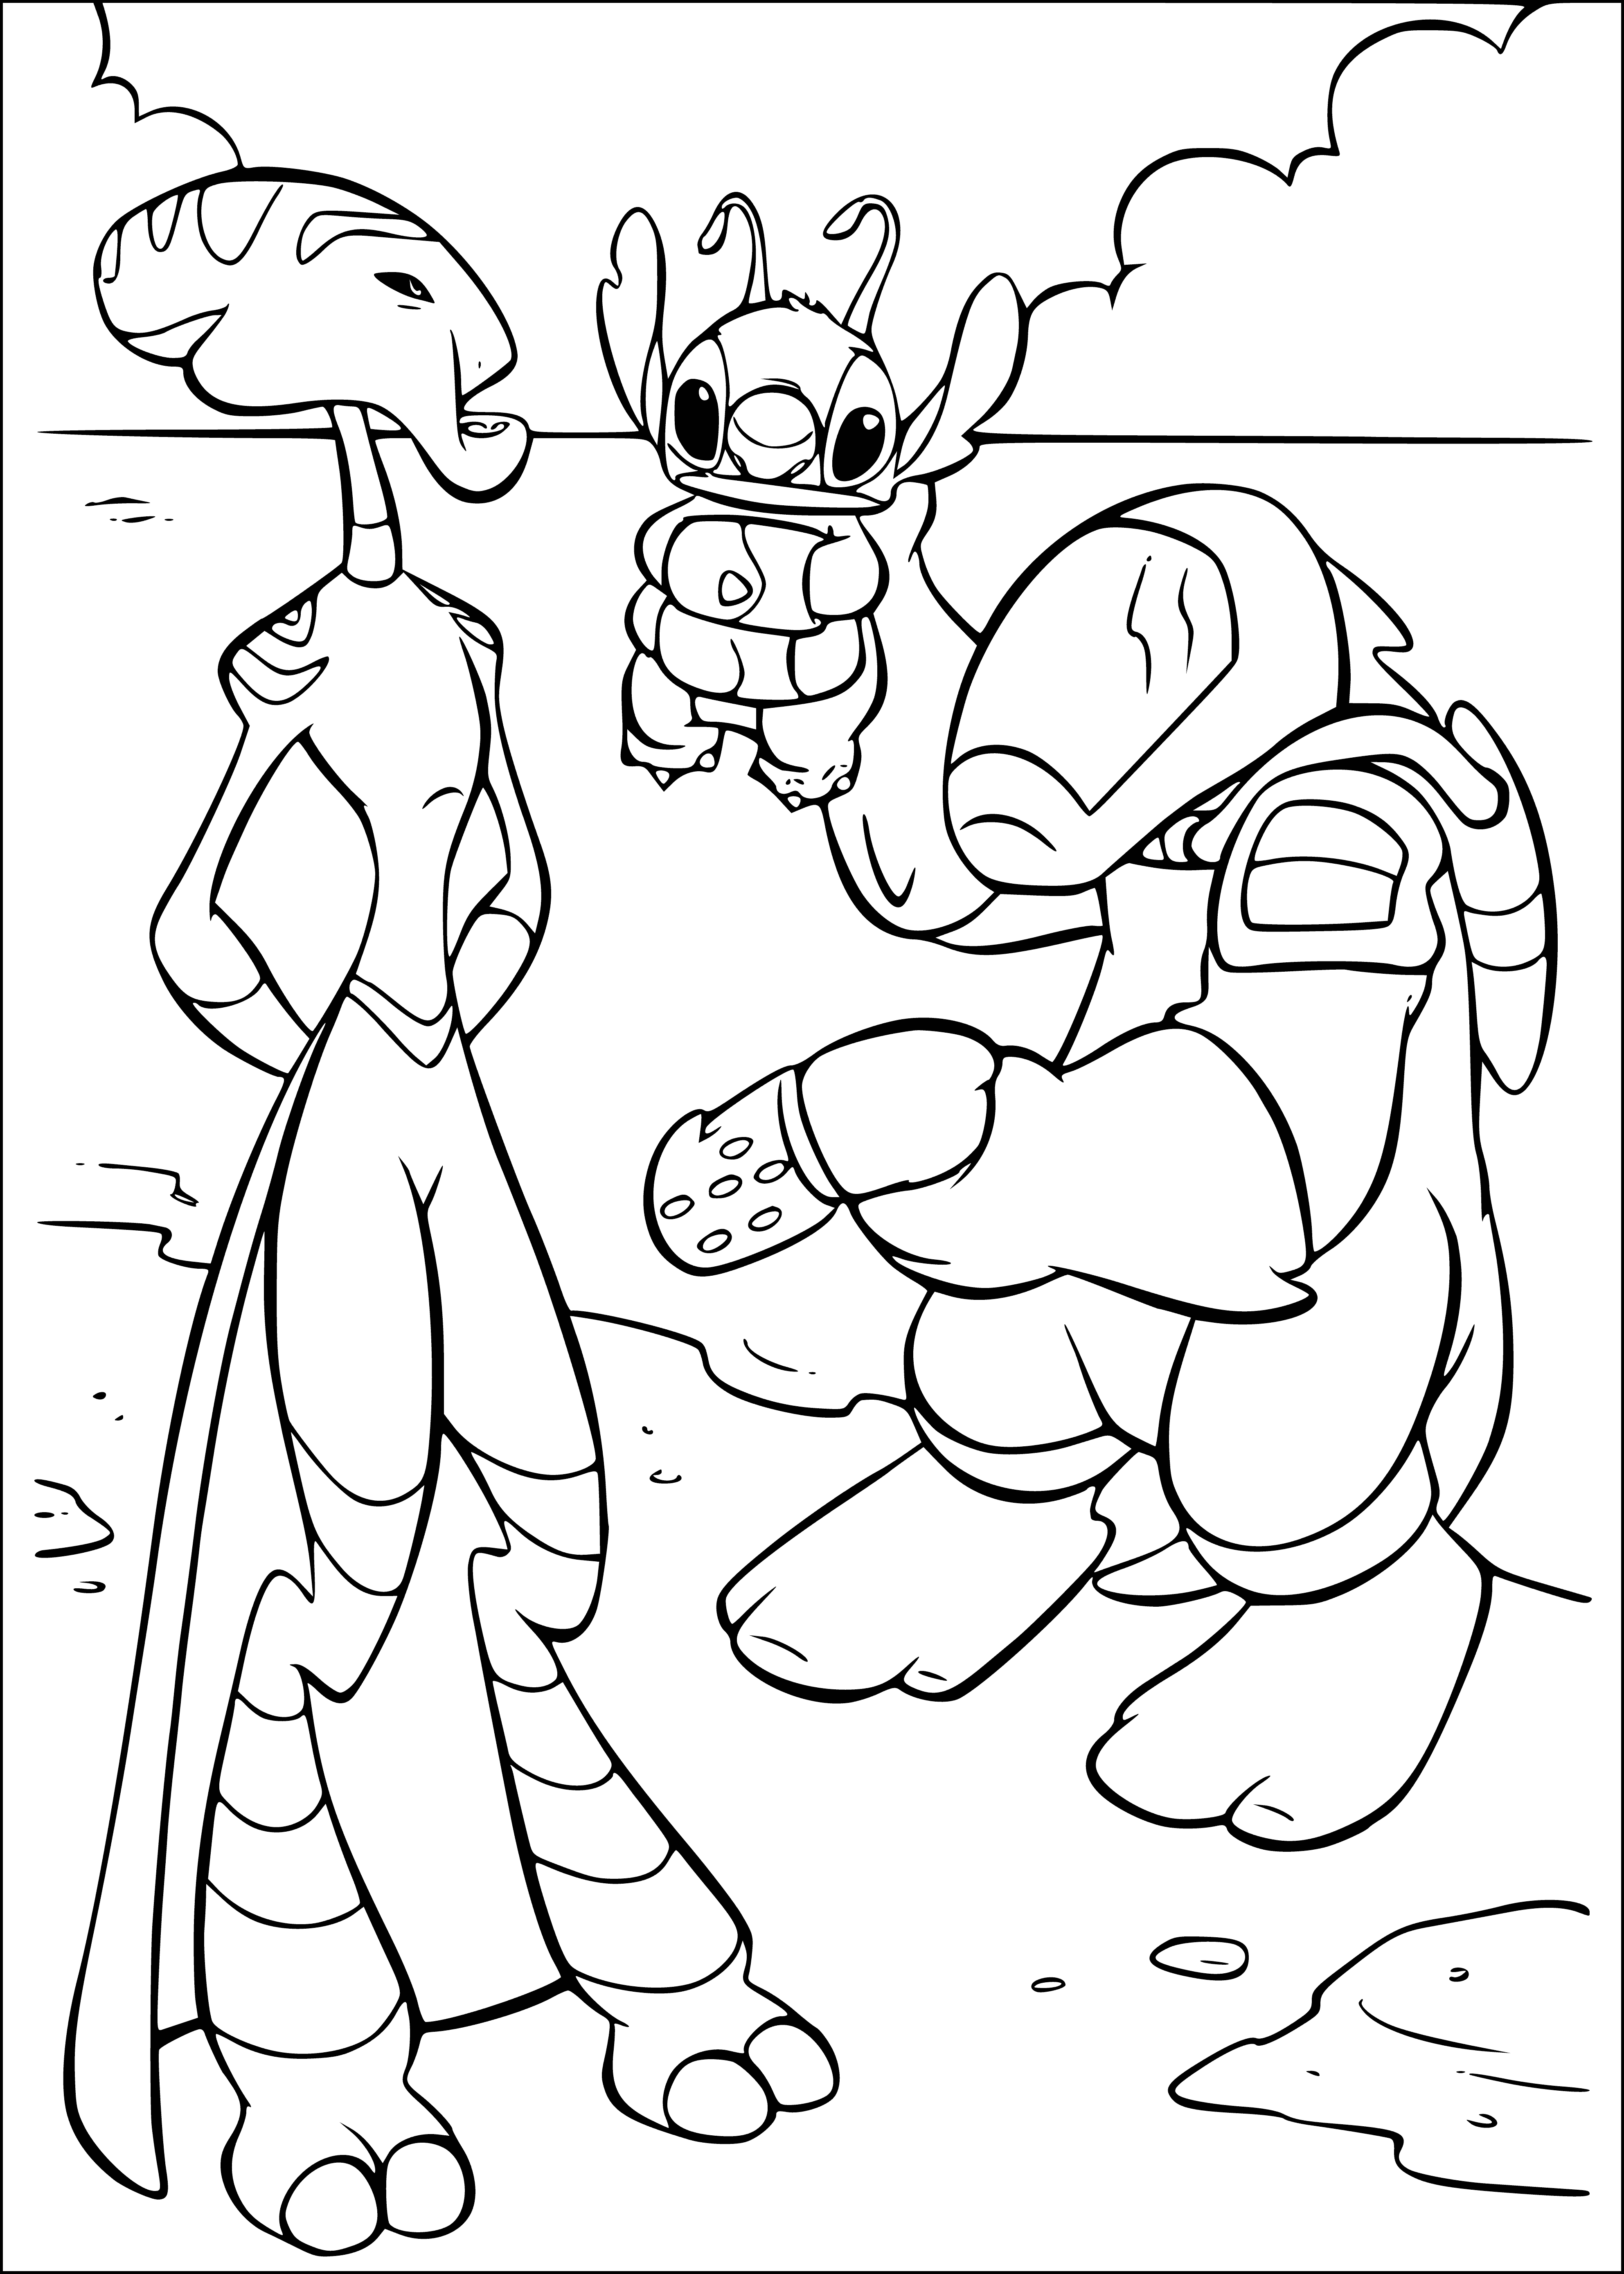 coloring page: A large blue creature with big black eyes holds a struggling yellow creature in its skinny arms.